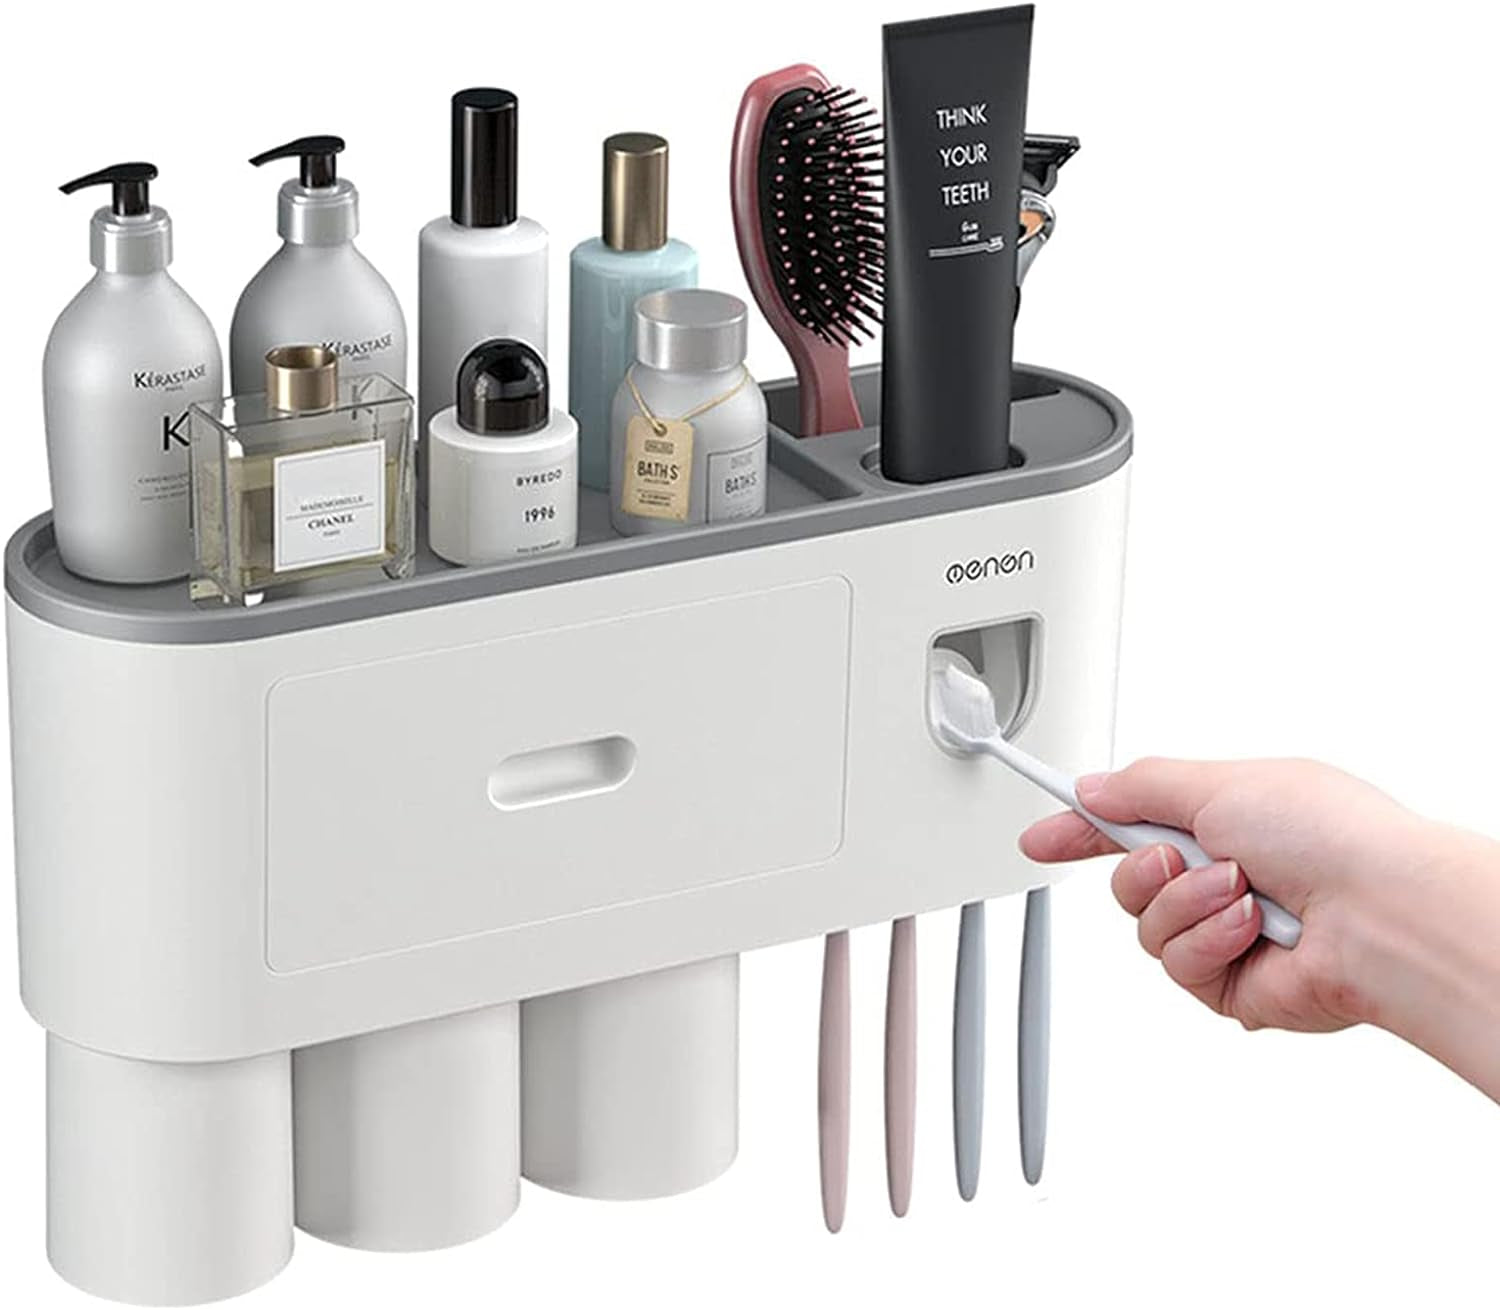 Toothbrush Holder With Automatic Toothpaste Dispenser